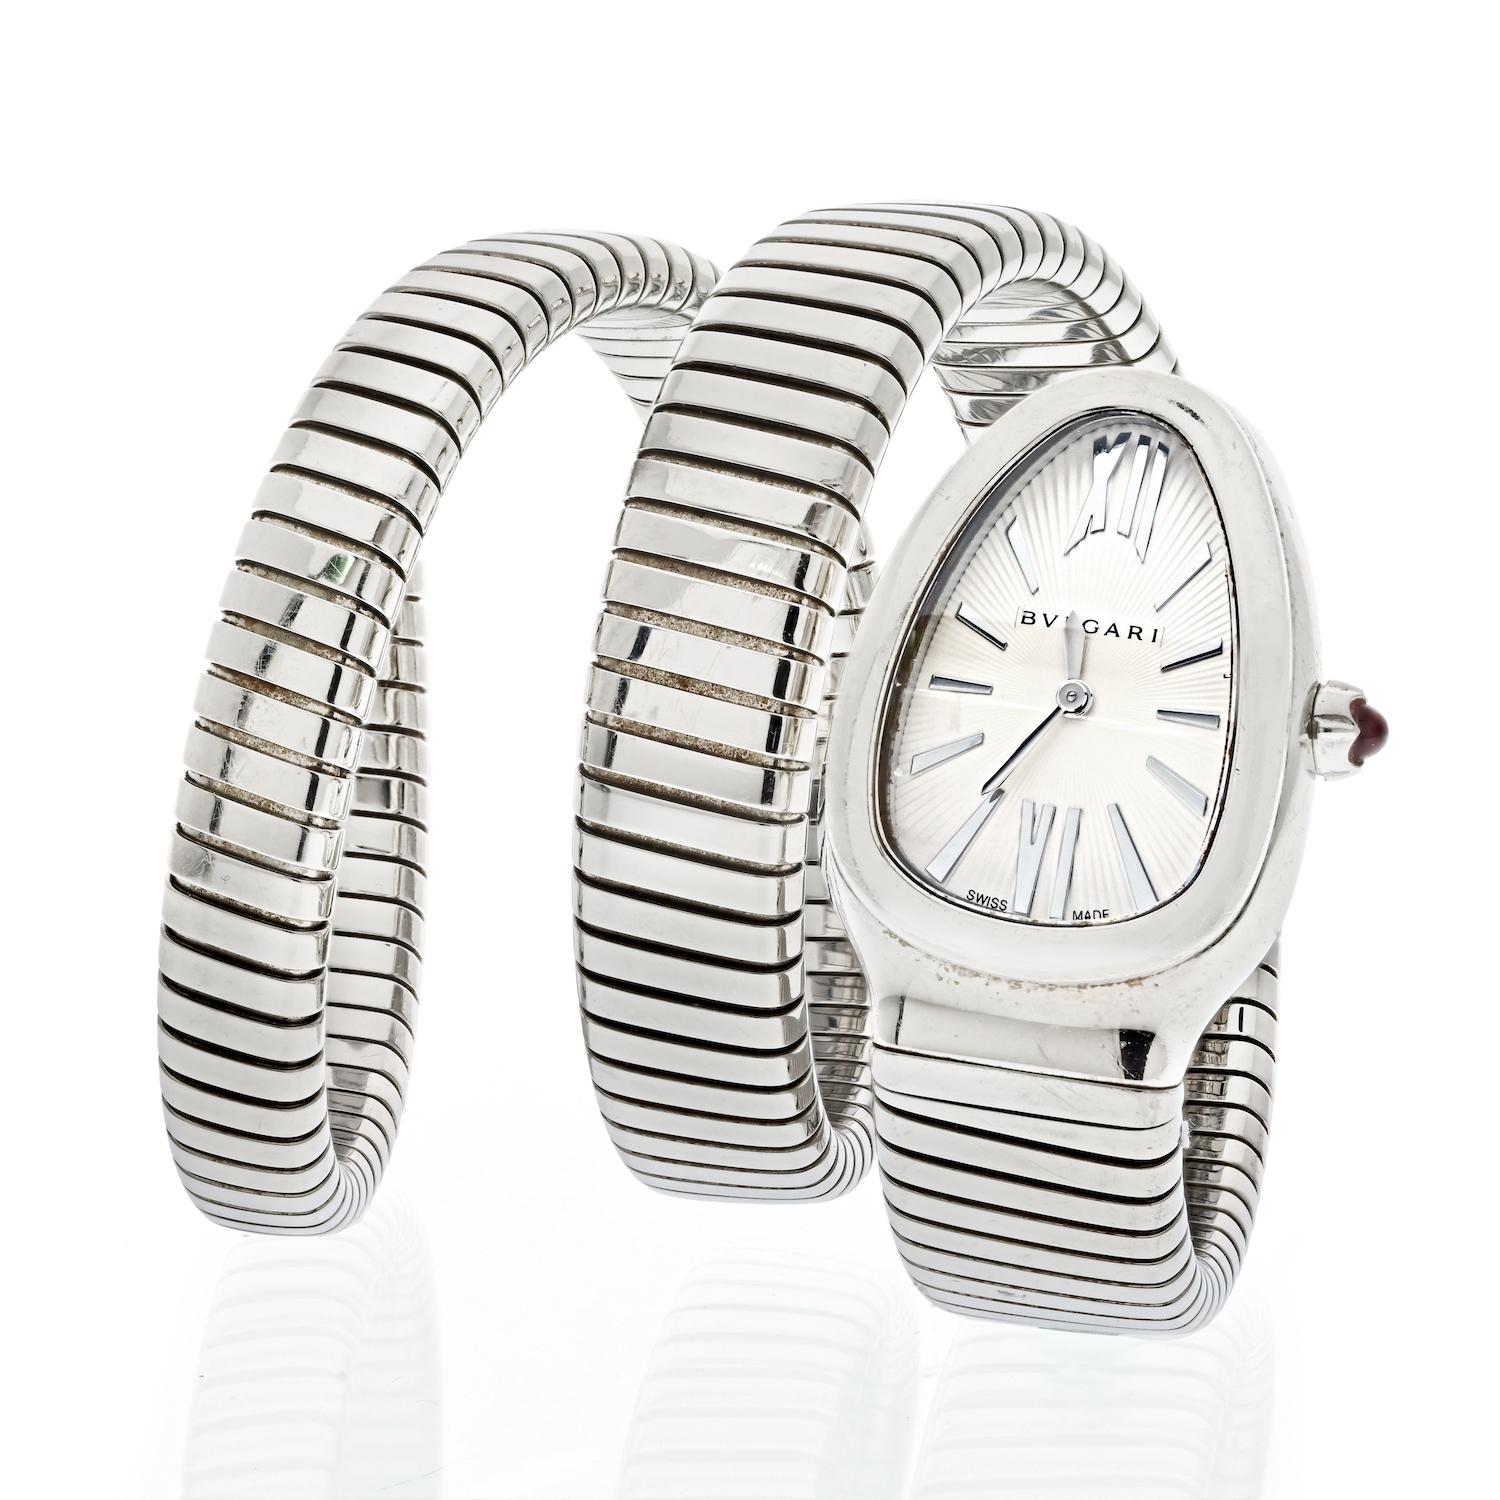 We love the Bvlgari Serpenti Wrap Watch for its timeless design and beautiful craftsmanship. It features a unique combination of materials and colors that make it a stand-out piece. The wrap design is both elegant and practical, making it a great